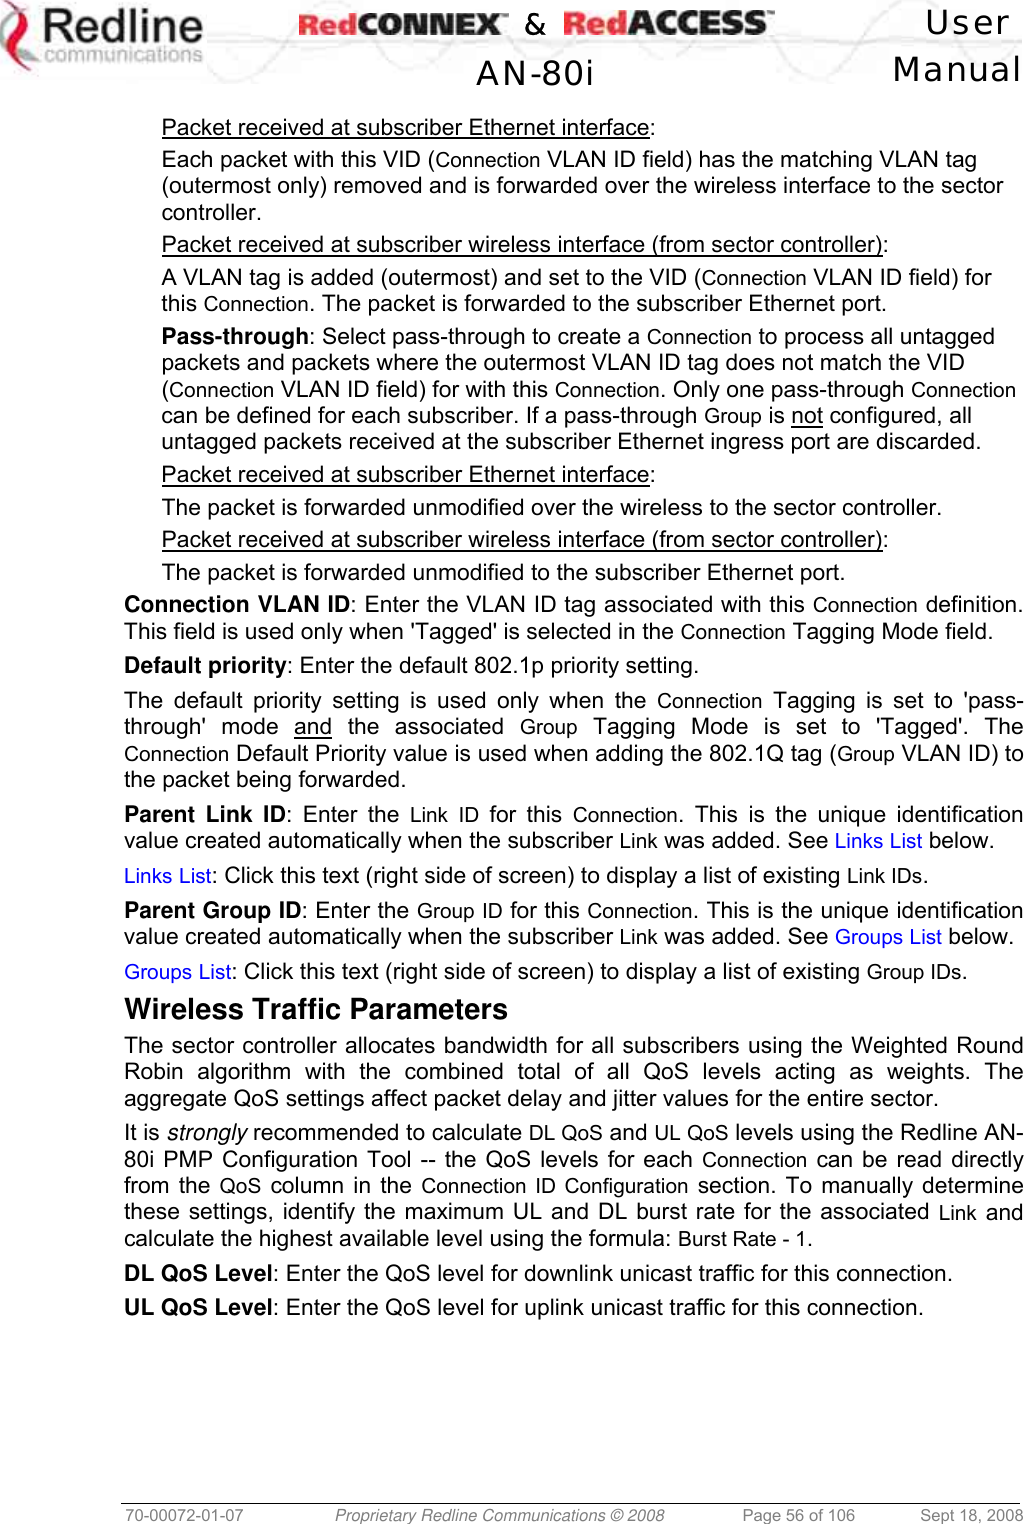    &amp;  User  AN-80i Manual  70-00072-01-07  Proprietary Redline Communications © 2008  Page 56 of 106  Sept 18, 2008  Packet received at subscriber Ethernet interface: Each packet with this VID (Connection VLAN ID field) has the matching VLAN tag (outermost only) removed and is forwarded over the wireless interface to the sector controller.  Packet received at subscriber wireless interface (from sector controller): A VLAN tag is added (outermost) and set to the VID (Connection VLAN ID field) for this Connection. The packet is forwarded to the subscriber Ethernet port.  Pass-through: Select pass-through to create a Connection to process all untagged packets and packets where the outermost VLAN ID tag does not match the VID (Connection VLAN ID field) for with this Connection. Only one pass-through Connection can be defined for each subscriber. If a pass-through Group is not configured, all untagged packets received at the subscriber Ethernet ingress port are discarded. Packet received at subscriber Ethernet interface: The packet is forwarded unmodified over the wireless to the sector controller. Packet received at subscriber wireless interface (from sector controller): The packet is forwarded unmodified to the subscriber Ethernet port.  Connection VLAN ID: Enter the VLAN ID tag associated with this Connection definition. This field is used only when &apos;Tagged&apos; is selected in the Connection Tagging Mode field.  Default priority: Enter the default 802.1p priority setting. The default priority setting is used only when the Connection Tagging is set to &apos;pass-through&apos; mode and the associated Group Tagging Mode is set to &apos;Tagged&apos;. The Connection Default Priority value is used when adding the 802.1Q tag (Group VLAN ID) to the packet being forwarded. Parent Link ID: Enter the Link ID for this Connection. This is the unique identification value created automatically when the subscriber Link was added. See Links List below. Links List: Click this text (right side of screen) to display a list of existing Link IDs. Parent Group ID: Enter the Group ID for this Connection. This is the unique identification value created automatically when the subscriber Link was added. See Groups List below. Groups List: Click this text (right side of screen) to display a list of existing Group IDs. Wireless Traffic Parameters The sector controller allocates bandwidth for all subscribers using the Weighted Round Robin algorithm with the combined total of all QoS levels acting as weights. The aggregate QoS settings affect packet delay and jitter values for the entire sector.  It is strongly recommended to calculate DL QoS and UL QoS levels using the Redline AN-80i PMP Configuration Tool -- the QoS levels for each Connection can be read directly from the QoS column in the Connection ID Configuration section. To manually determine these settings, identify the maximum UL and DL burst rate for the associated Link and calculate the highest available level using the formula: Burst Rate - 1. DL QoS Level: Enter the QoS level for downlink unicast traffic for this connection.  UL QoS Level: Enter the QoS level for uplink unicast traffic for this connection. 